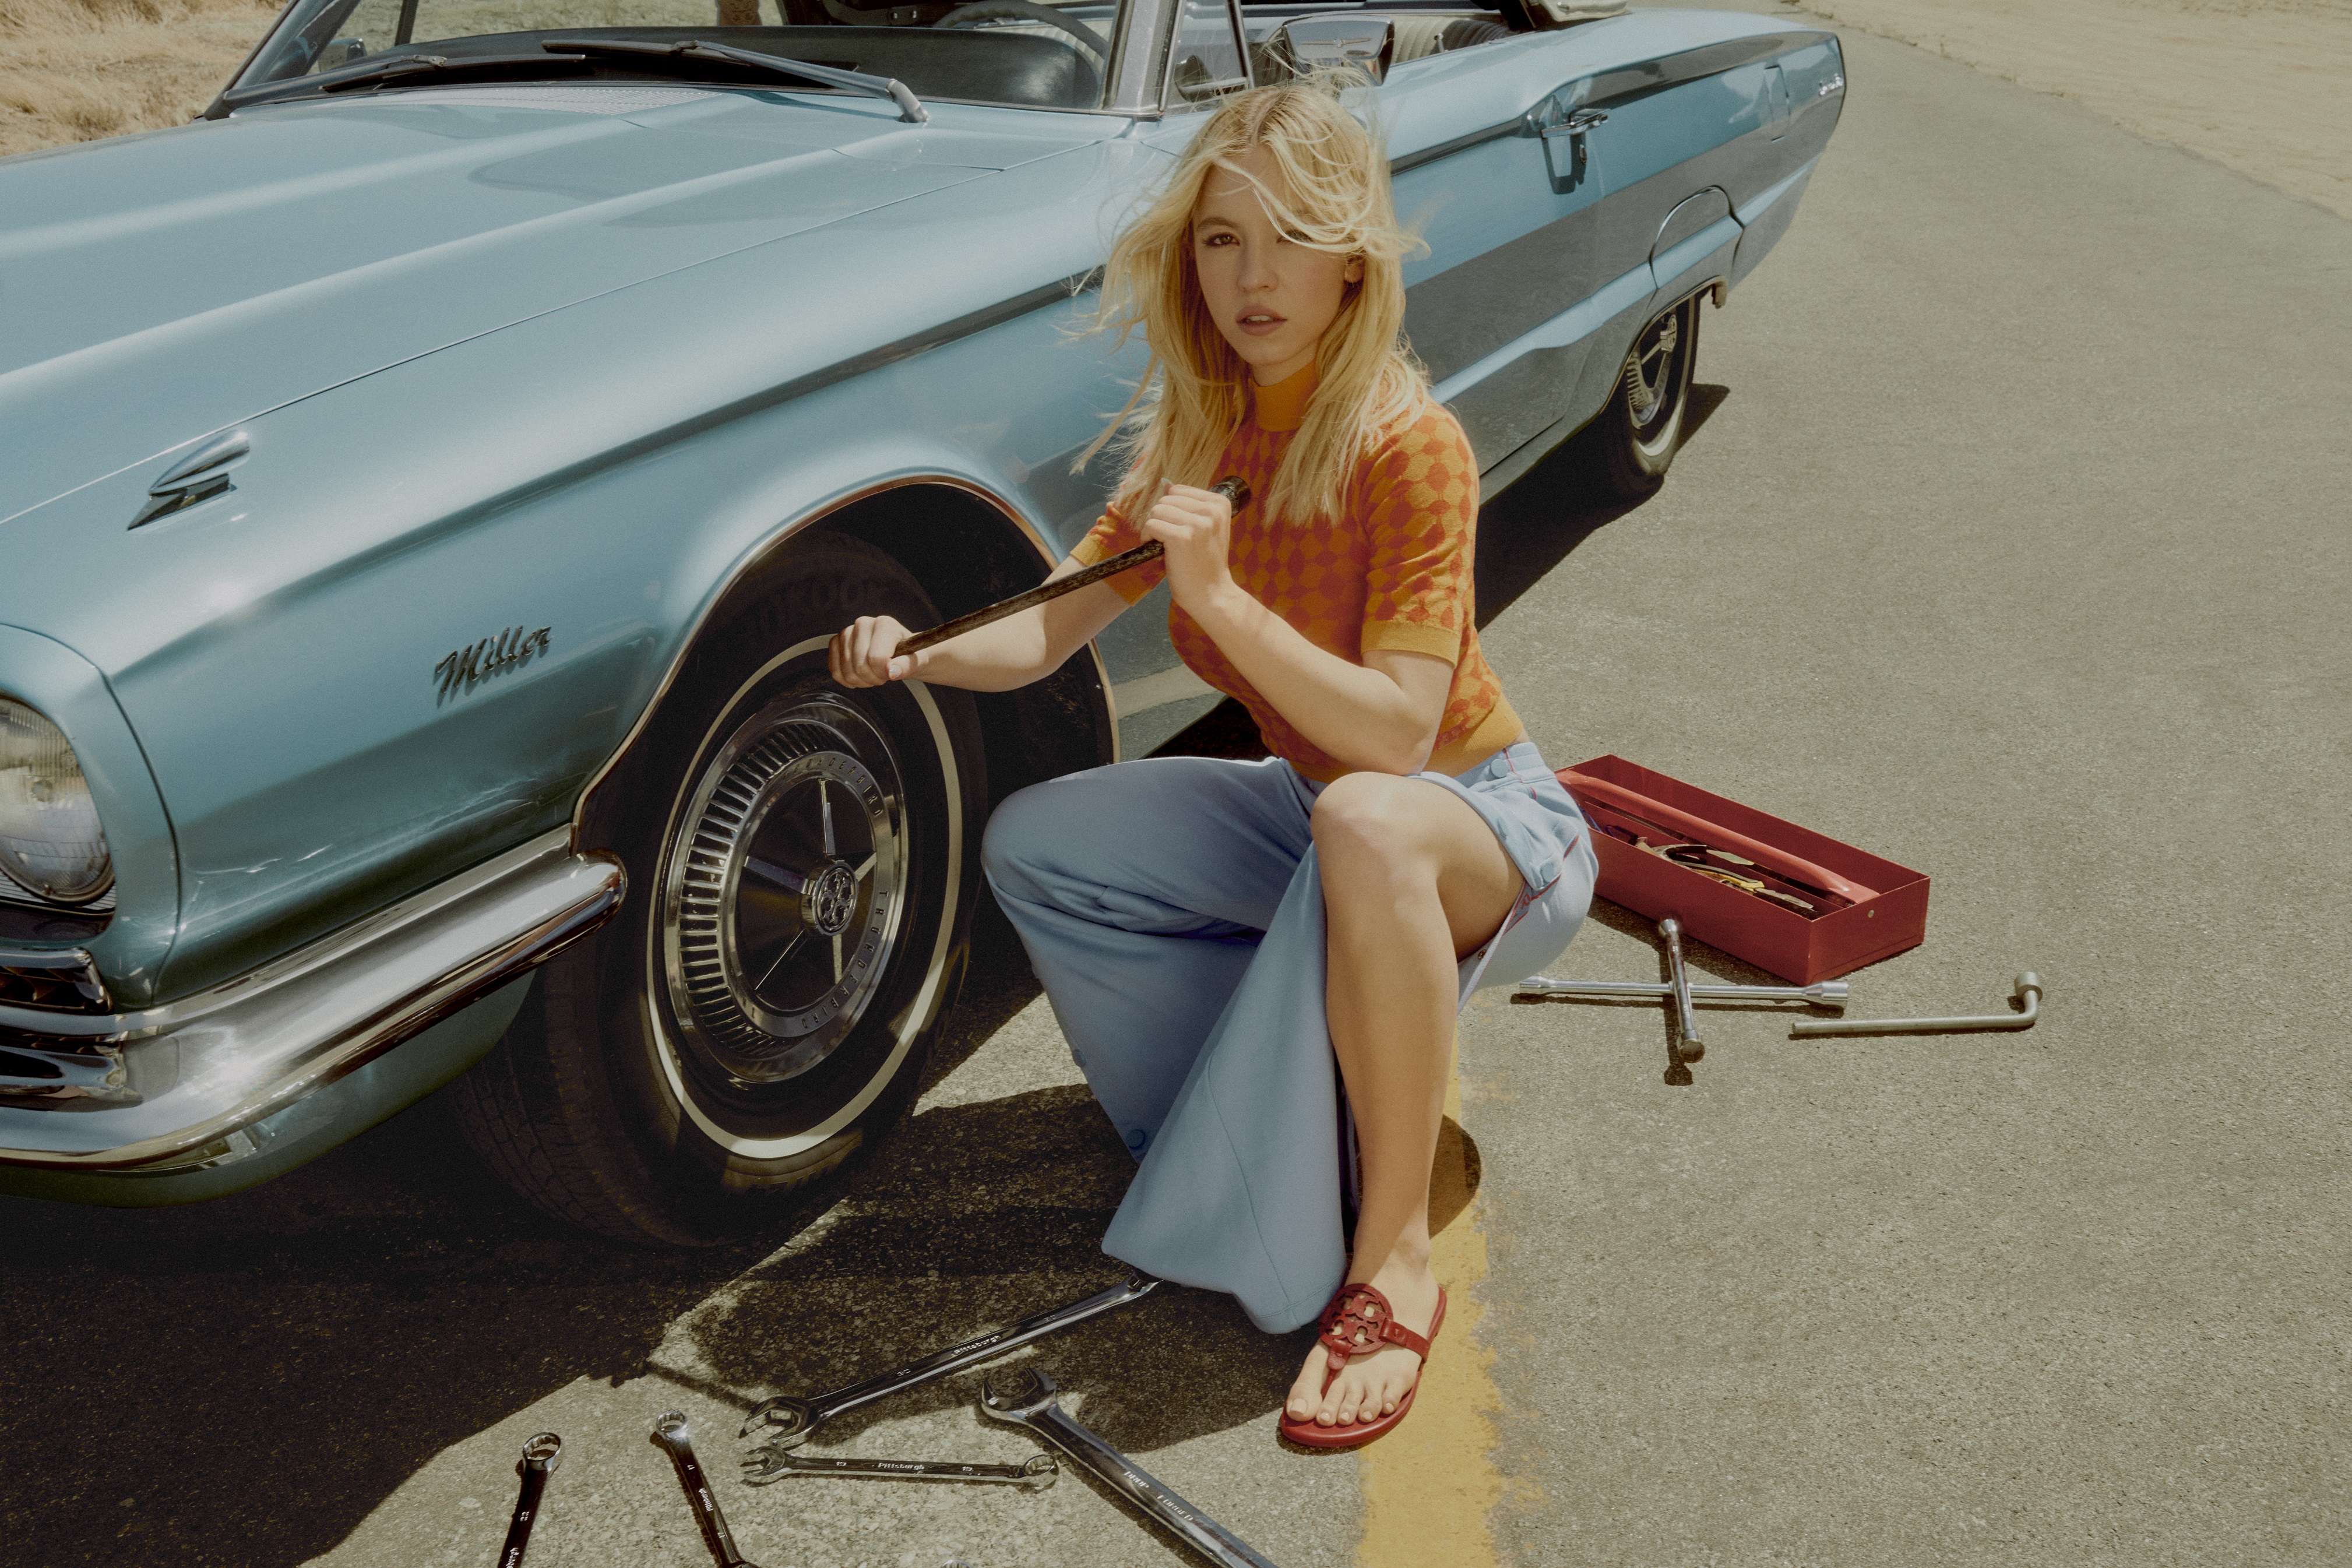 Sydney Sweeney Fixes Up a Car in New Tory Burch Campaign